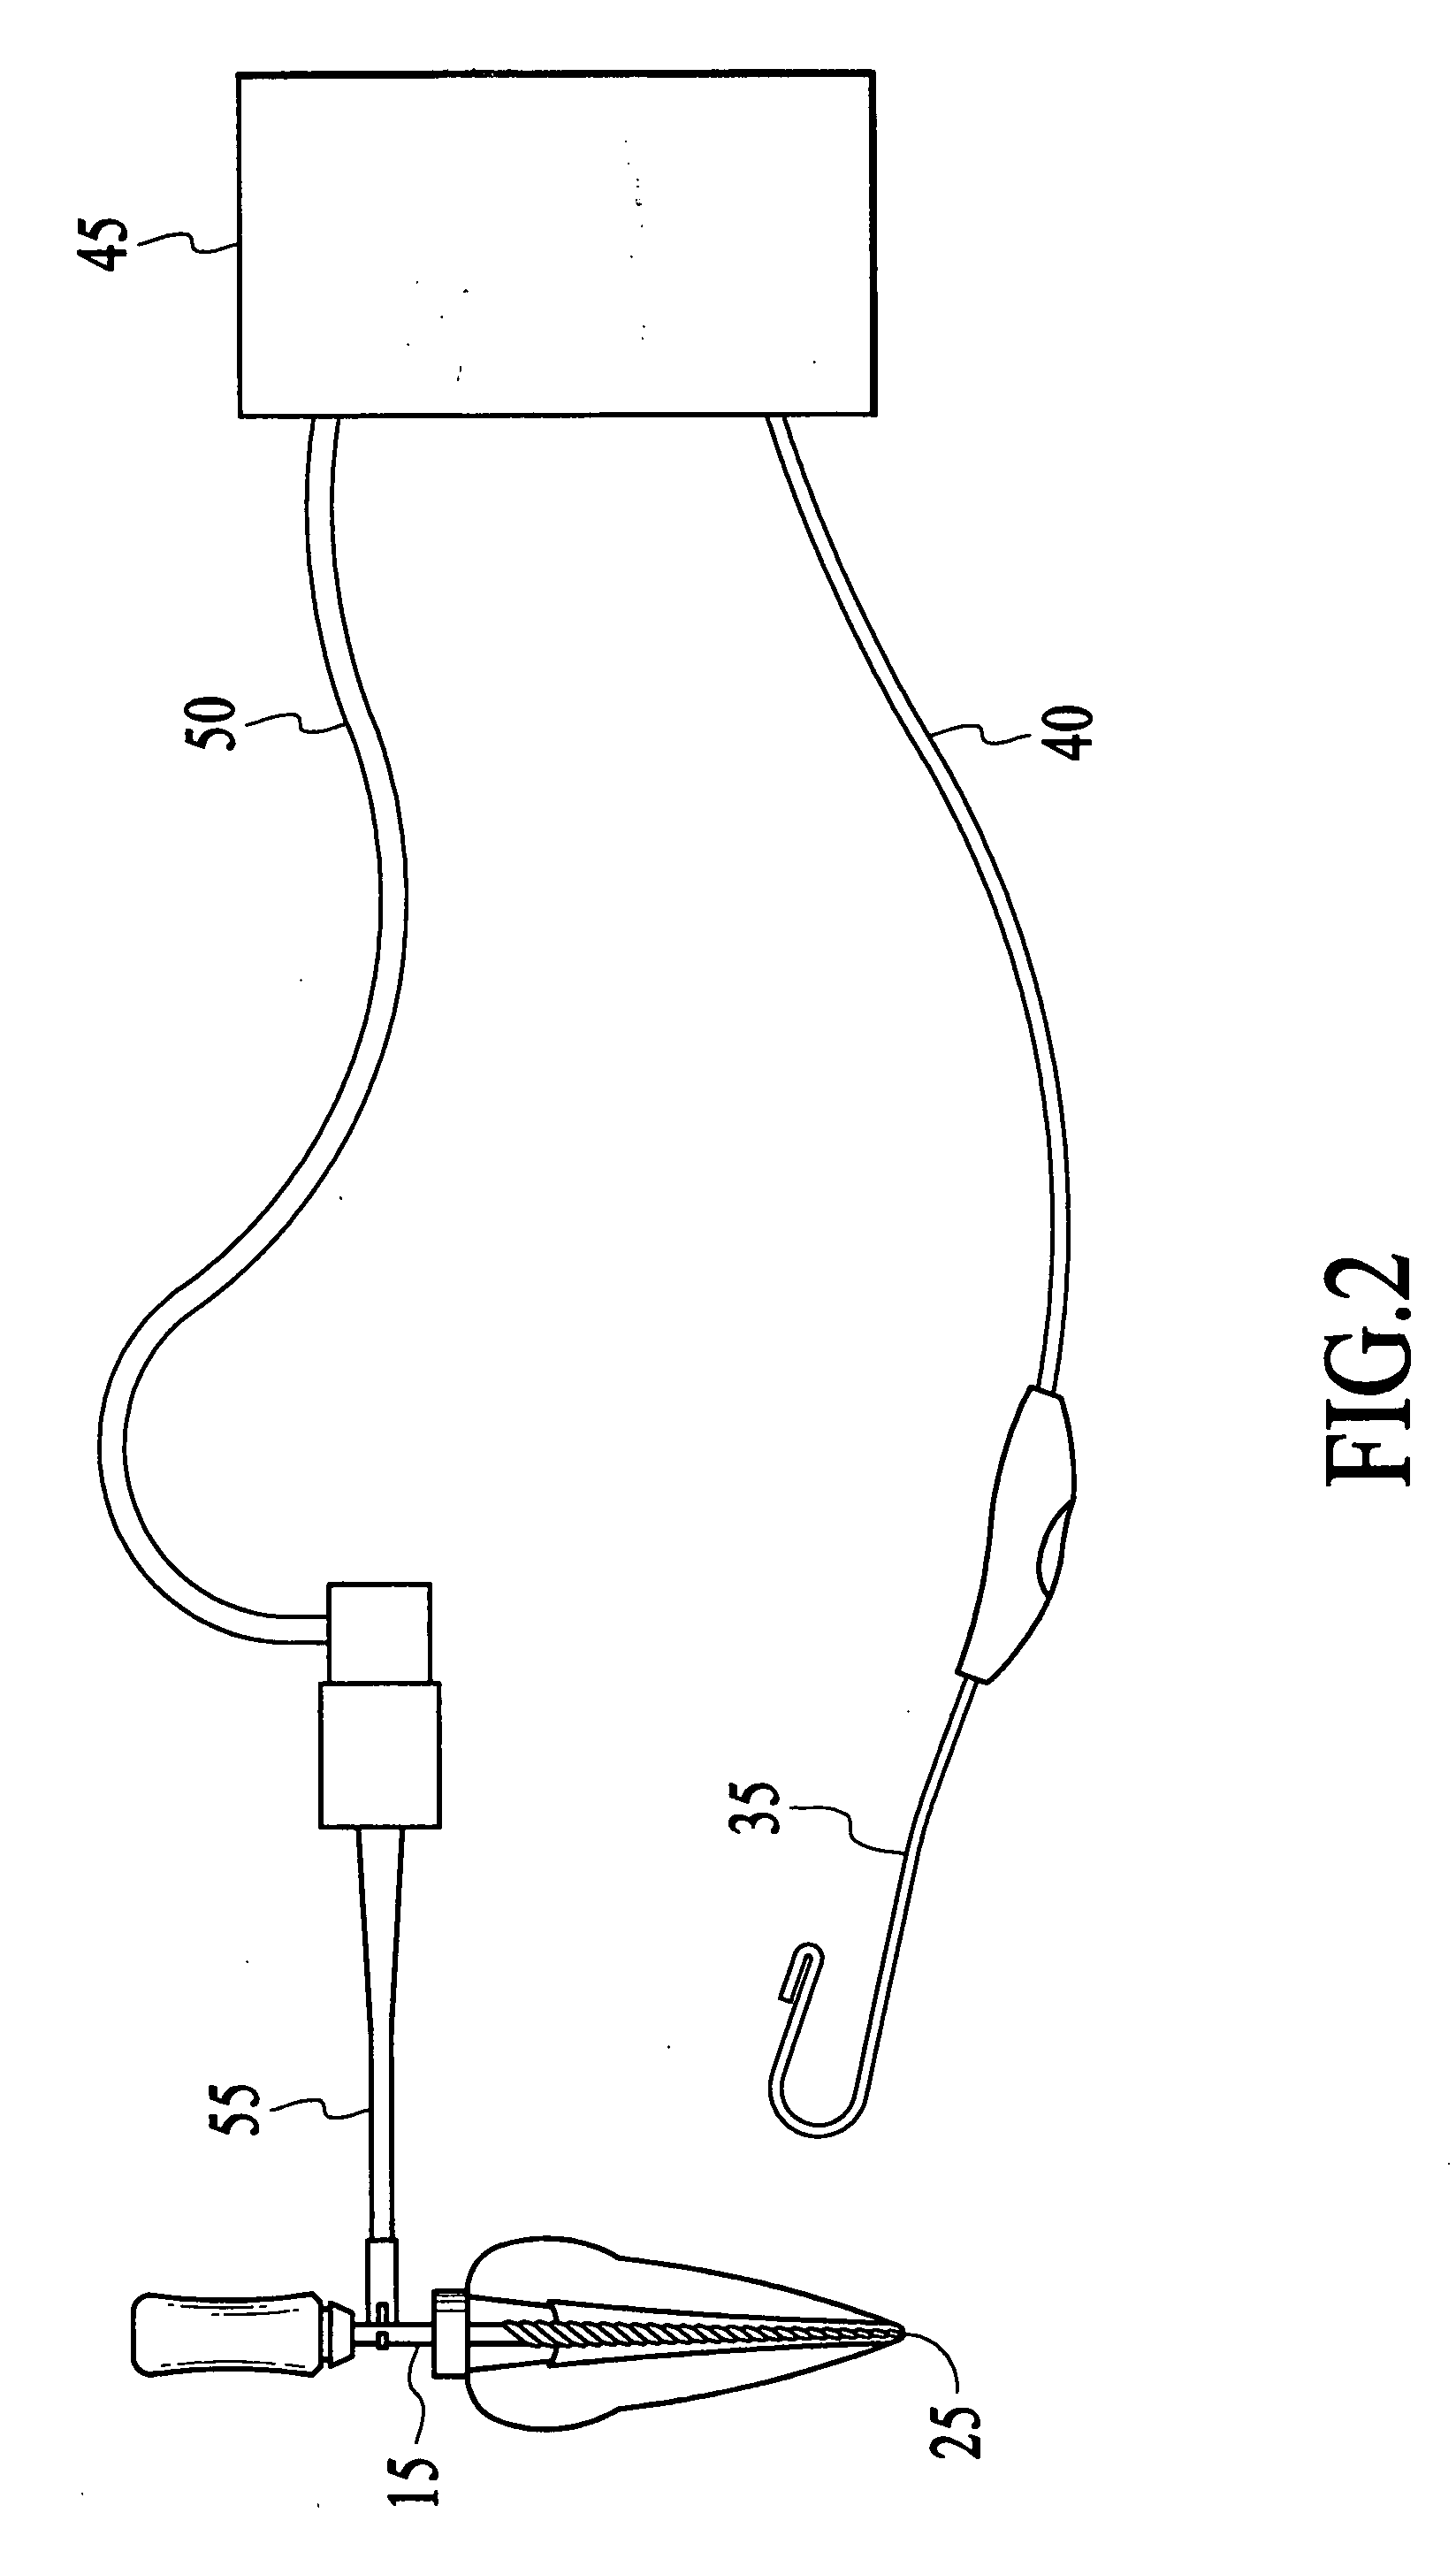 Endodontic instrument with non-conductive coating and method for locating the apex of a tooth